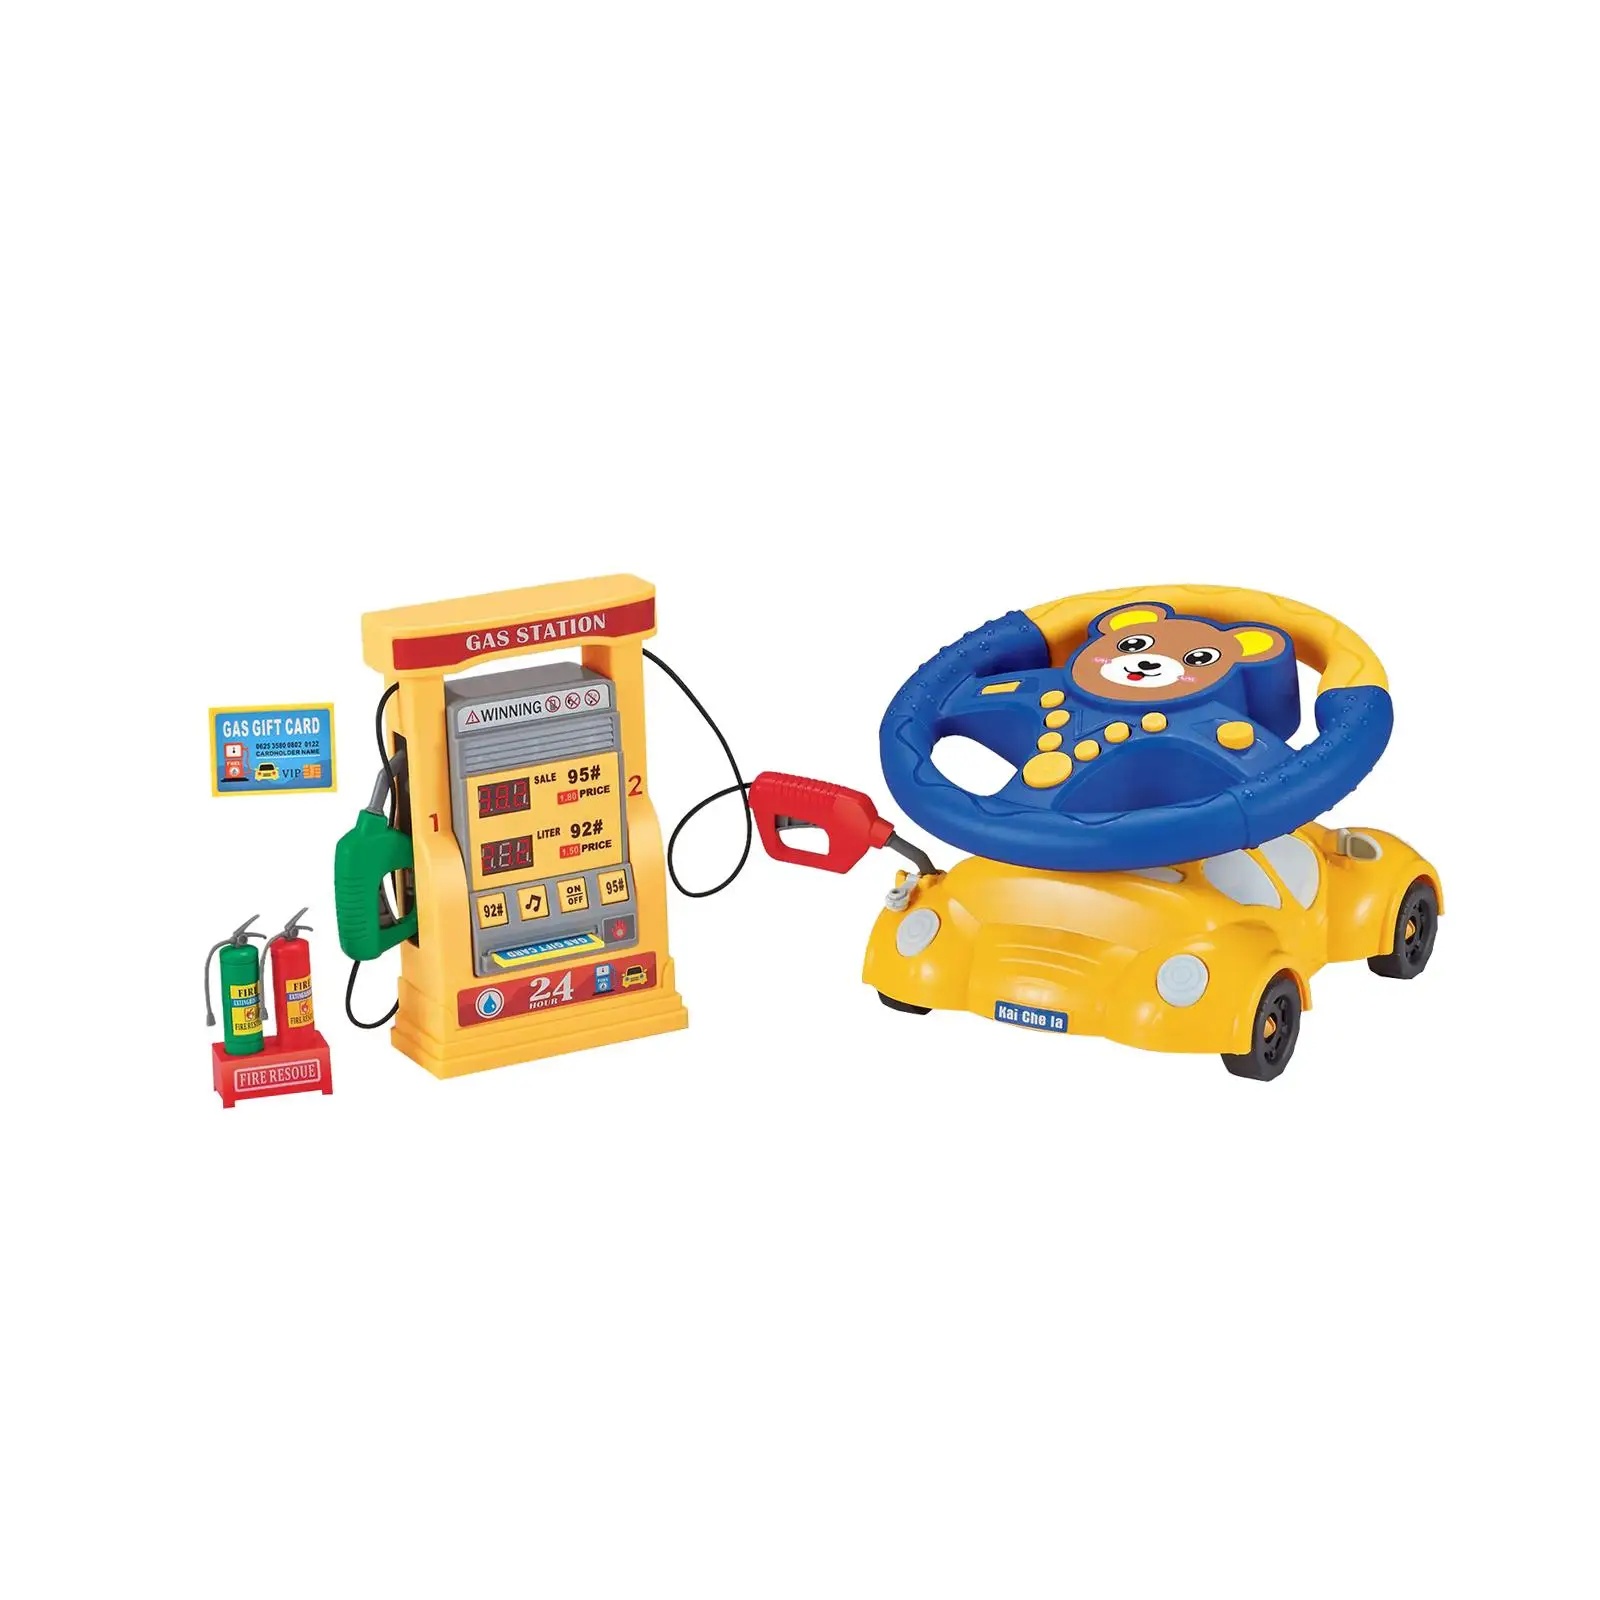 Simulation Gas Station Toy Pretend Play Interesting Sound for Creative Gifts